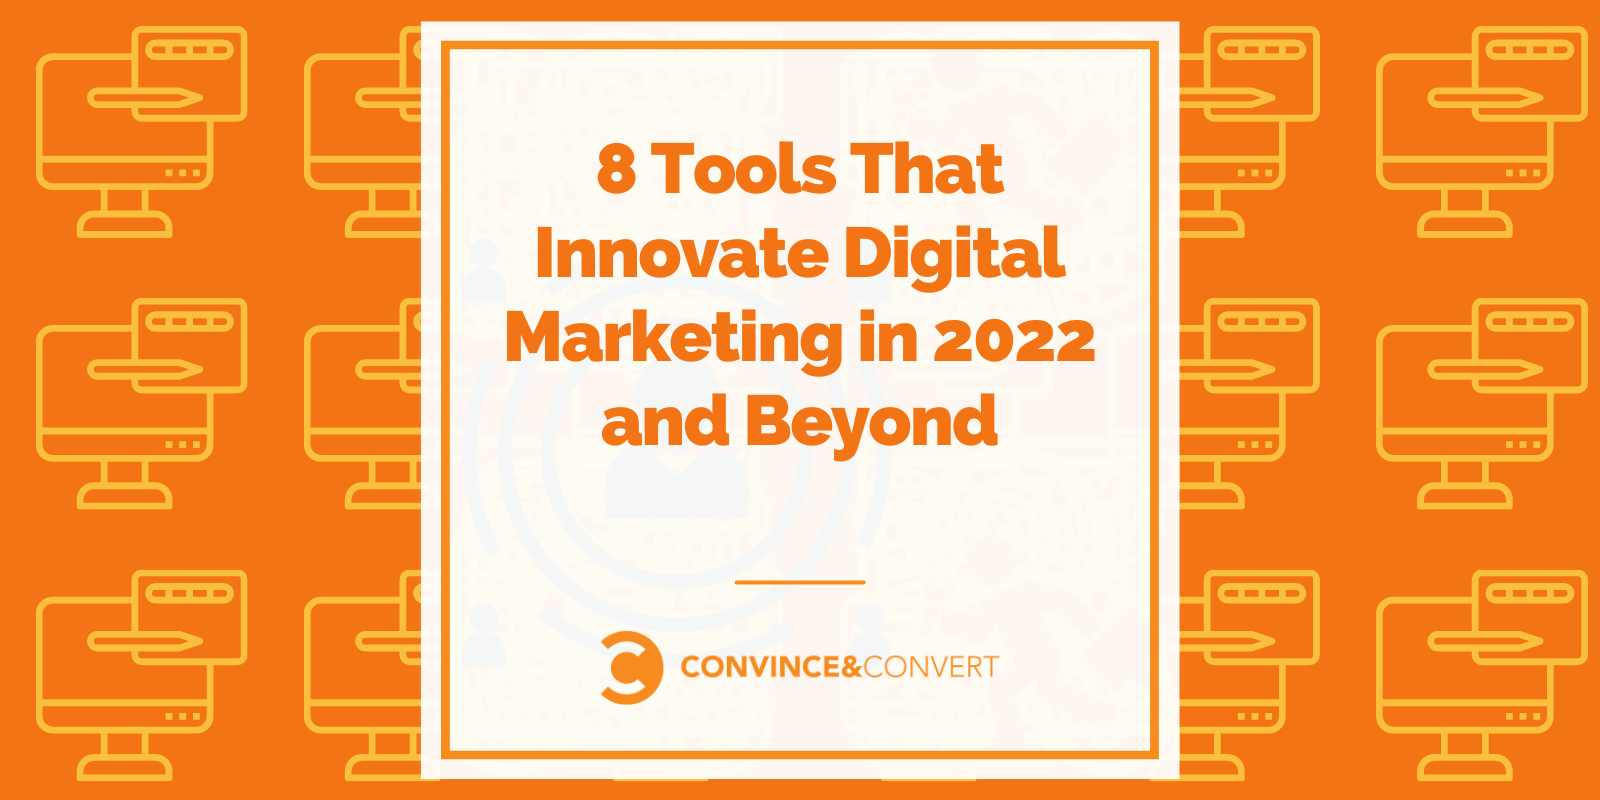 8 Tools That Innovate Digital Marketing in 2022 and Beyond